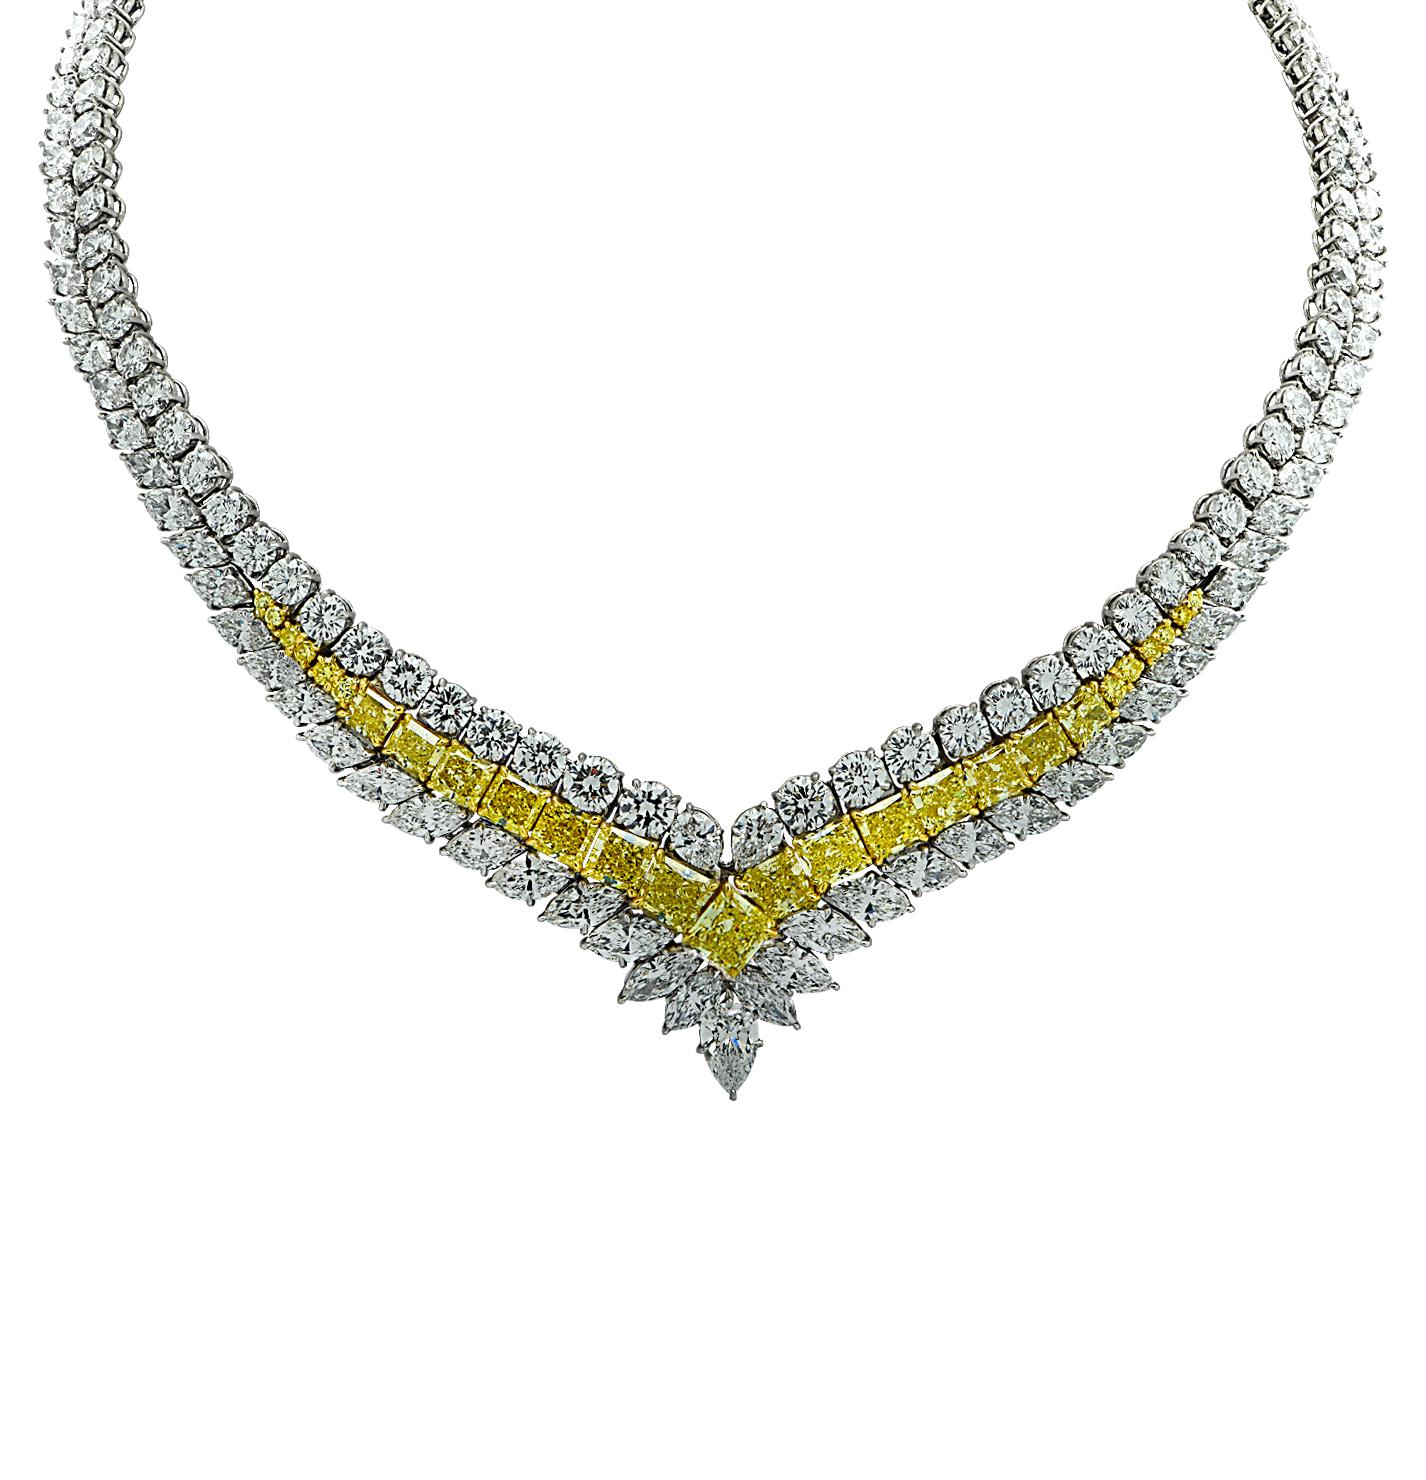 Modern 80.81 Carat GIA Certified Fancy Intense Yellow and White Diamond Necklace For Sale